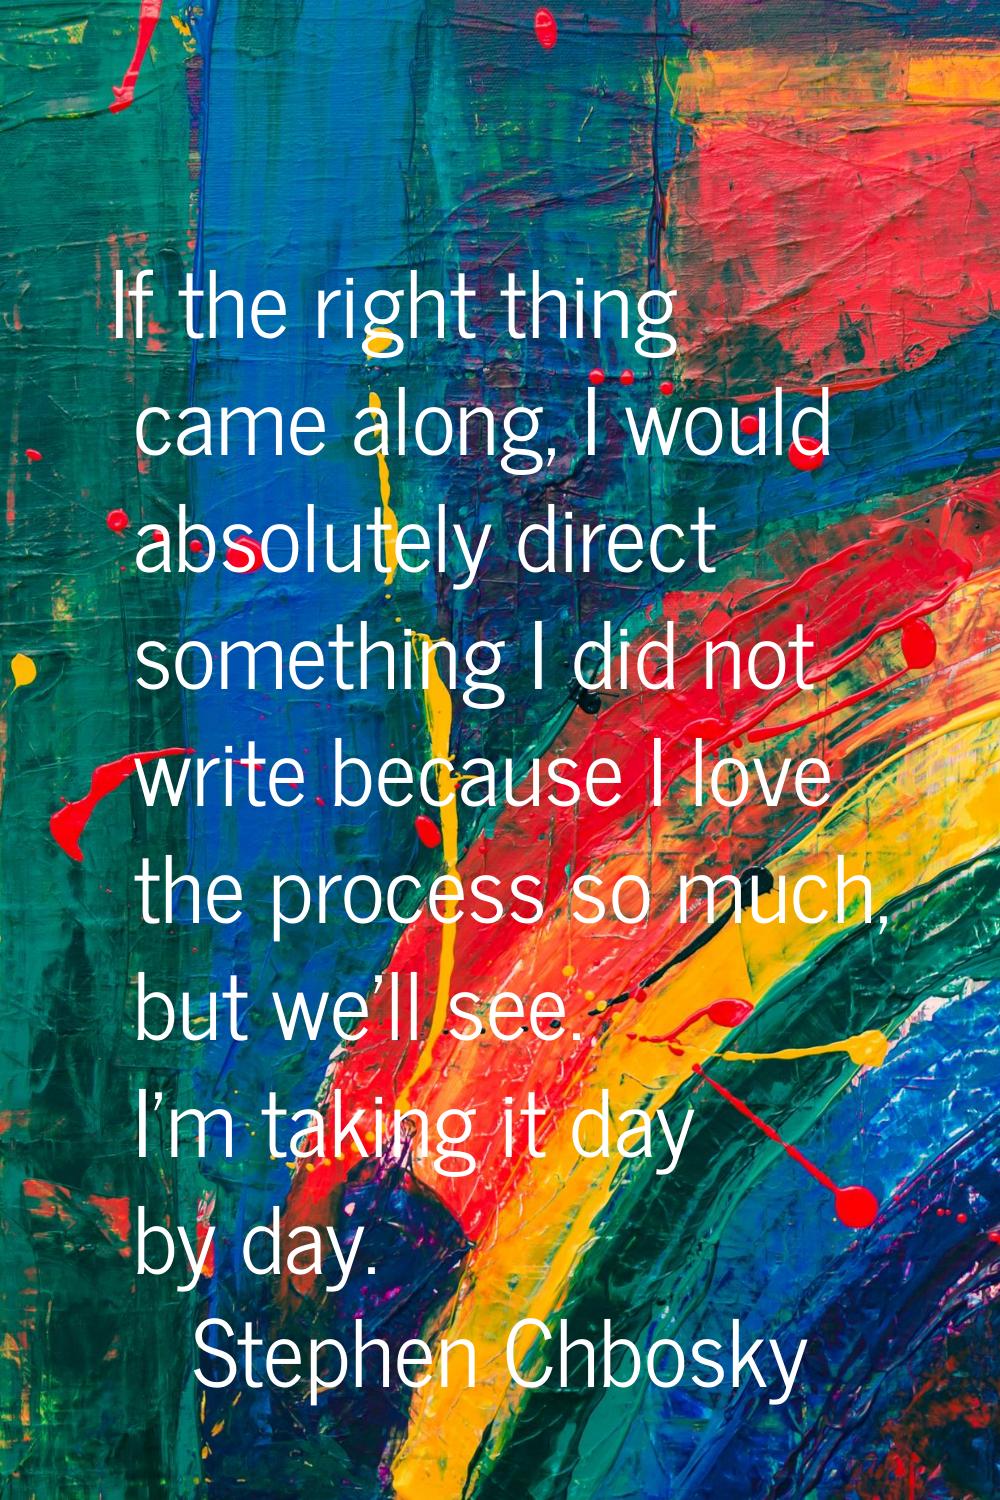 If the right thing came along, I would absolutely direct something I did not write because I love t